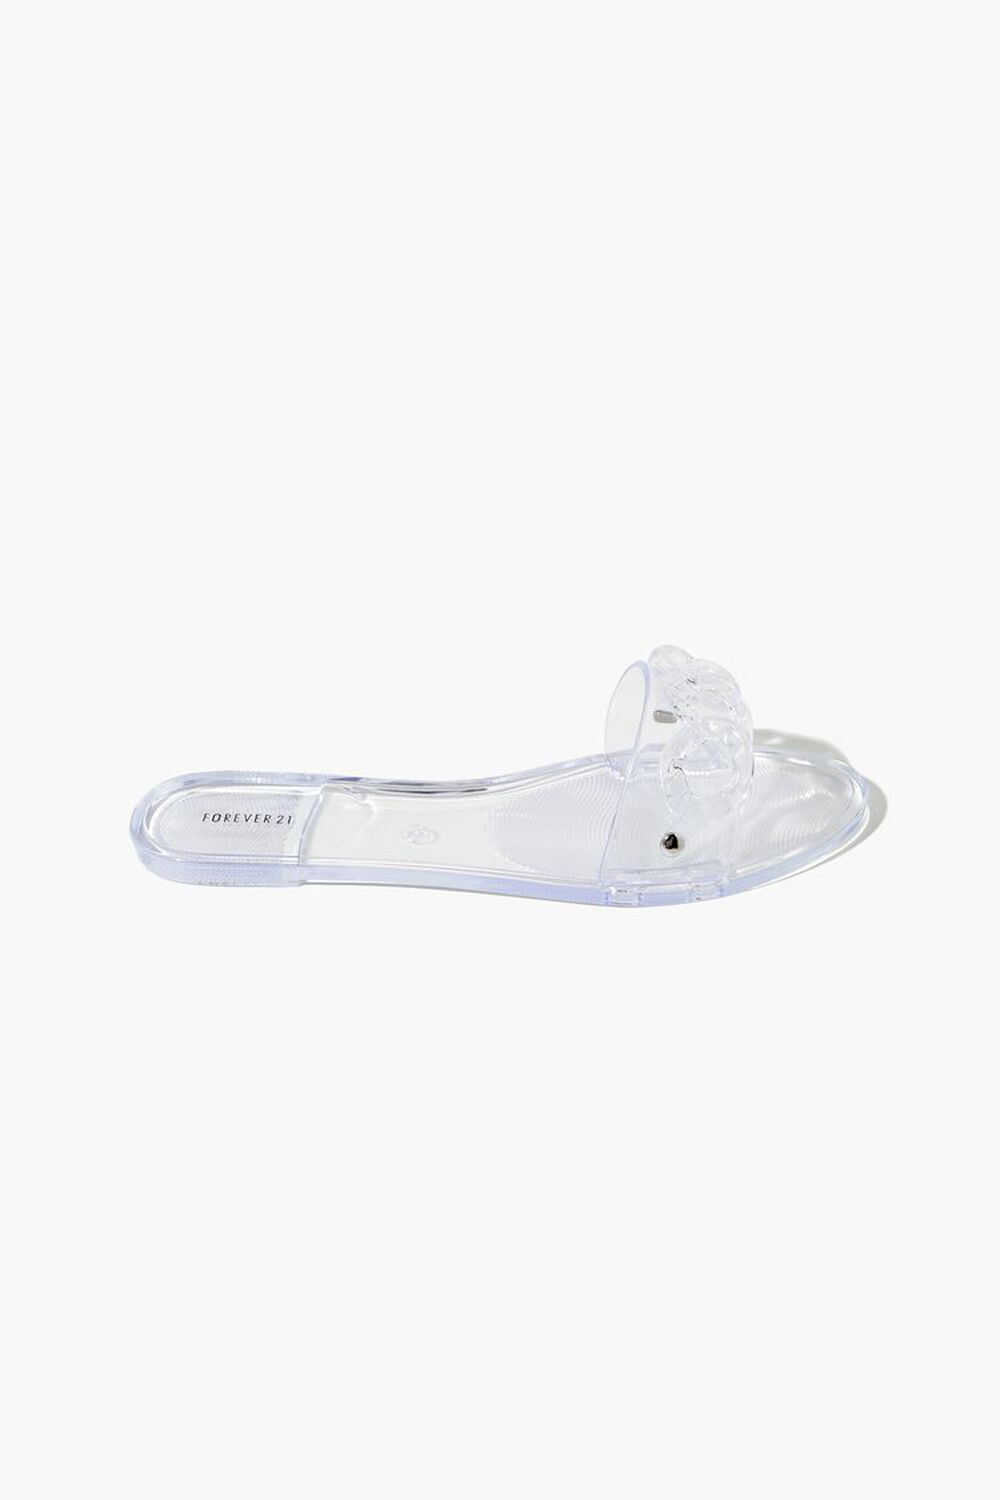 CLEAR Chain-Strap Sandals, image 2